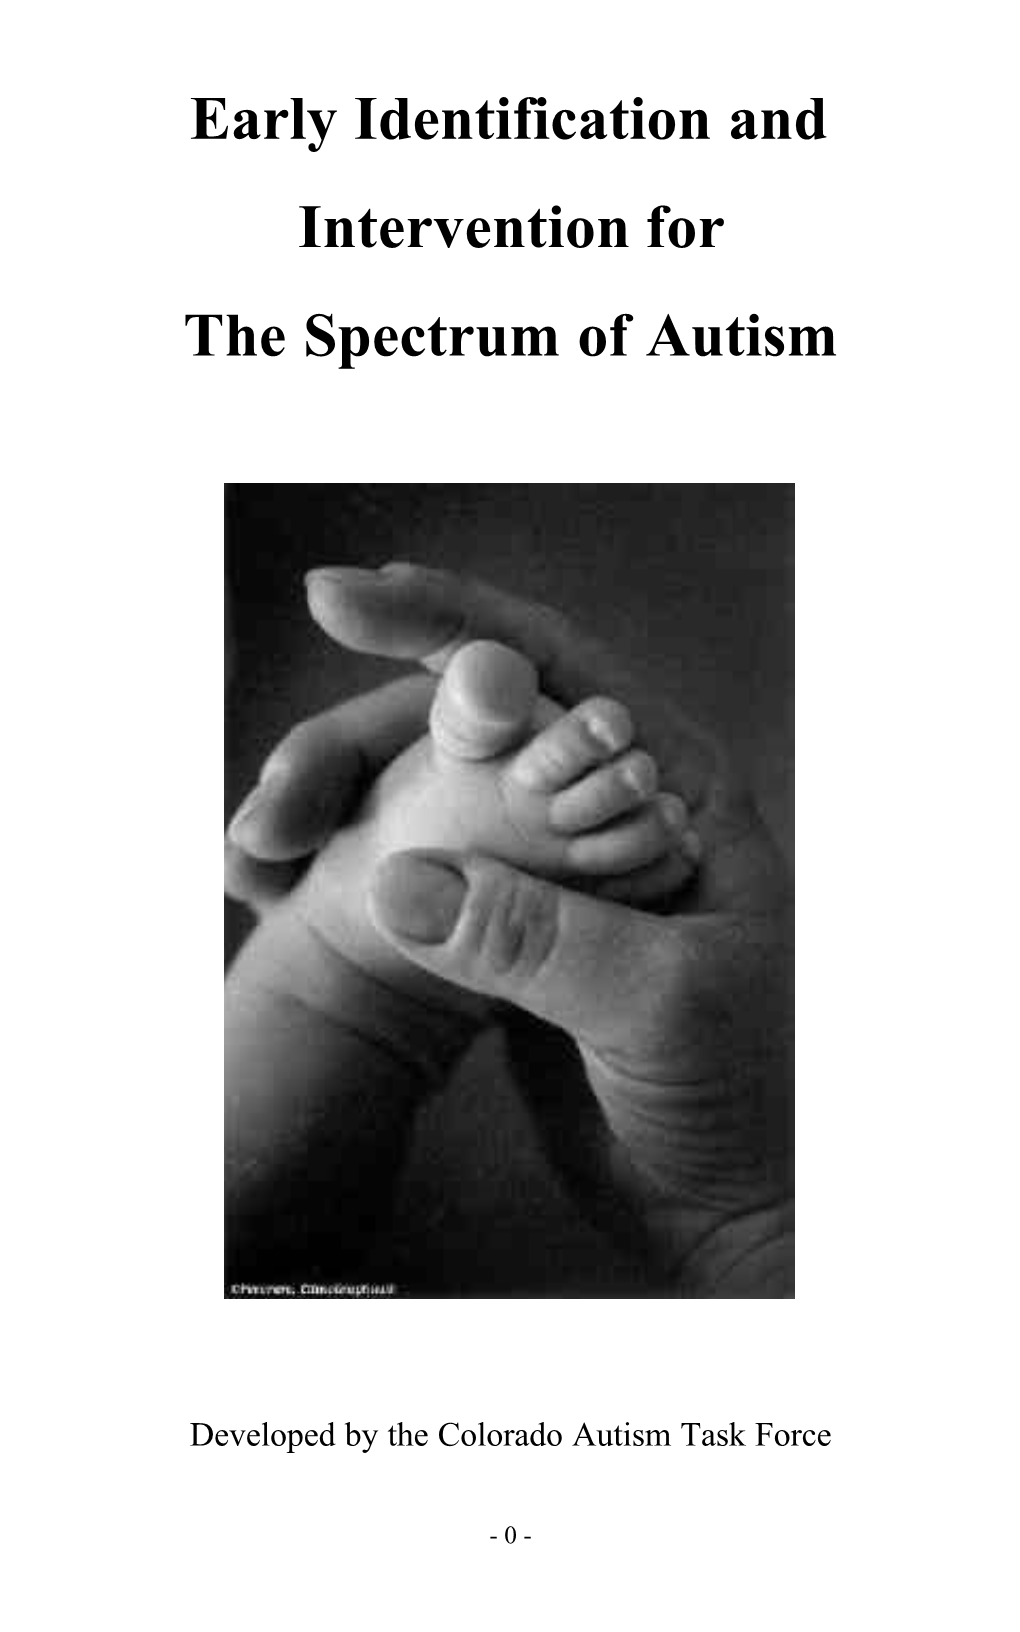 Early Identification and Intervention for the Spectrum of Autism